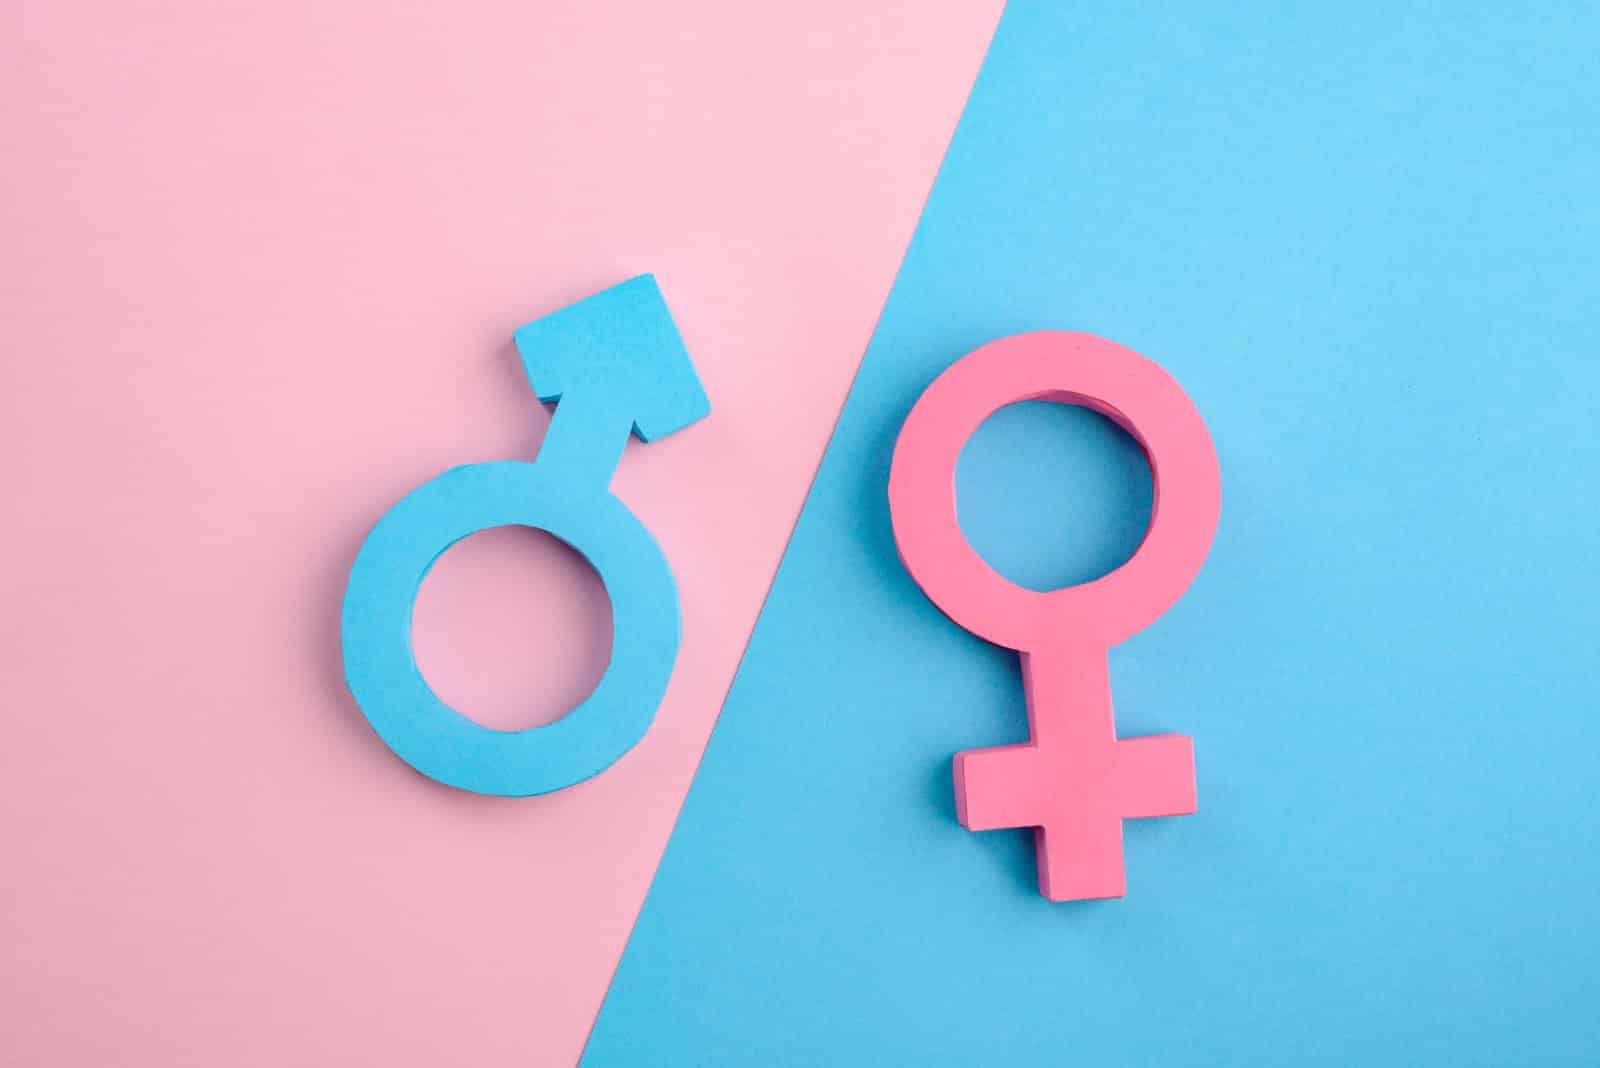 <p class="wp-caption-text">Image Credit: Shutterstock / Yuriy Golub</p>  <p>Gone are the days of assuming traditional gender roles without raising eyebrows. Today, discussions about gender identity and expression require sensitivity and awareness of diverse perspectives.</p>